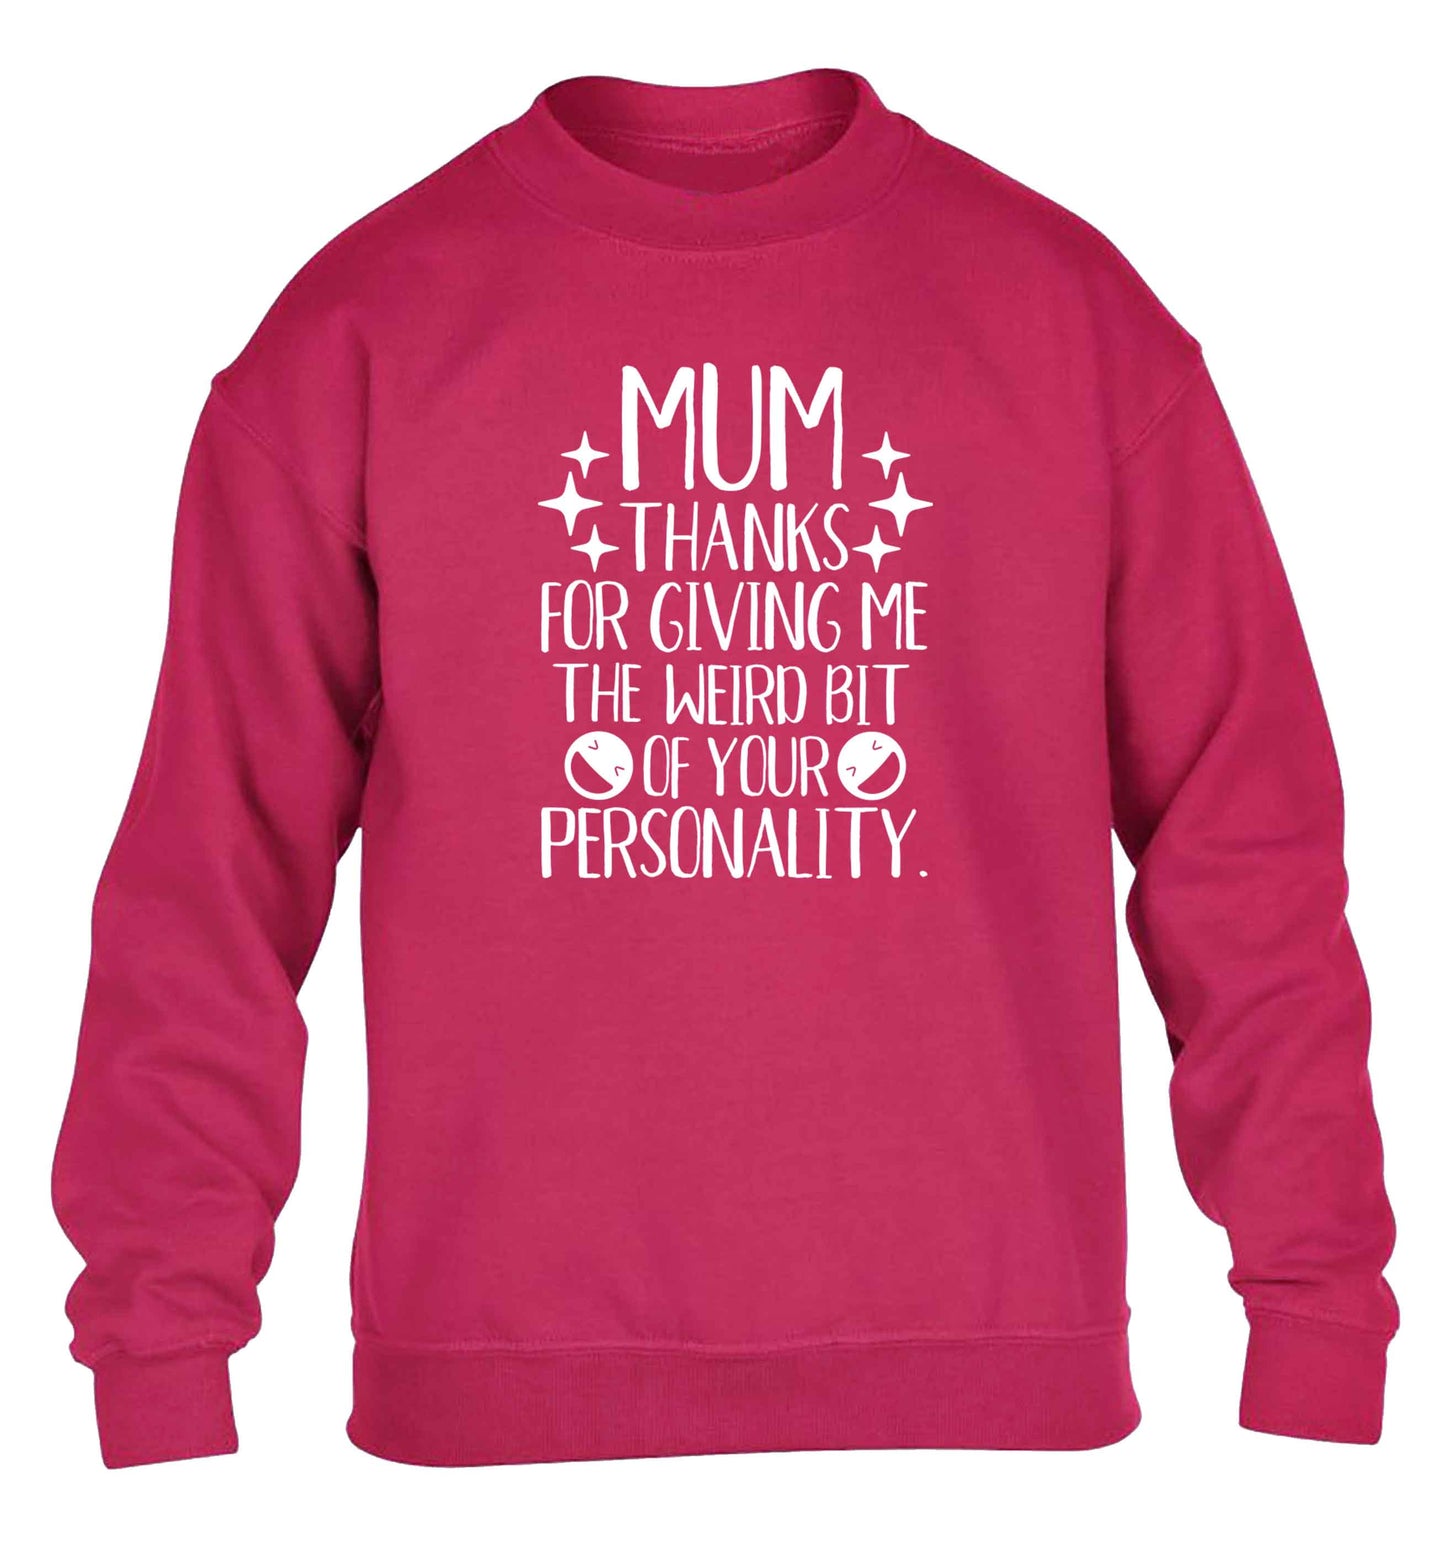 Mum, I love you more than halloumi and if you know me at all you know how deep that is children's pink sweater 12-13 Years